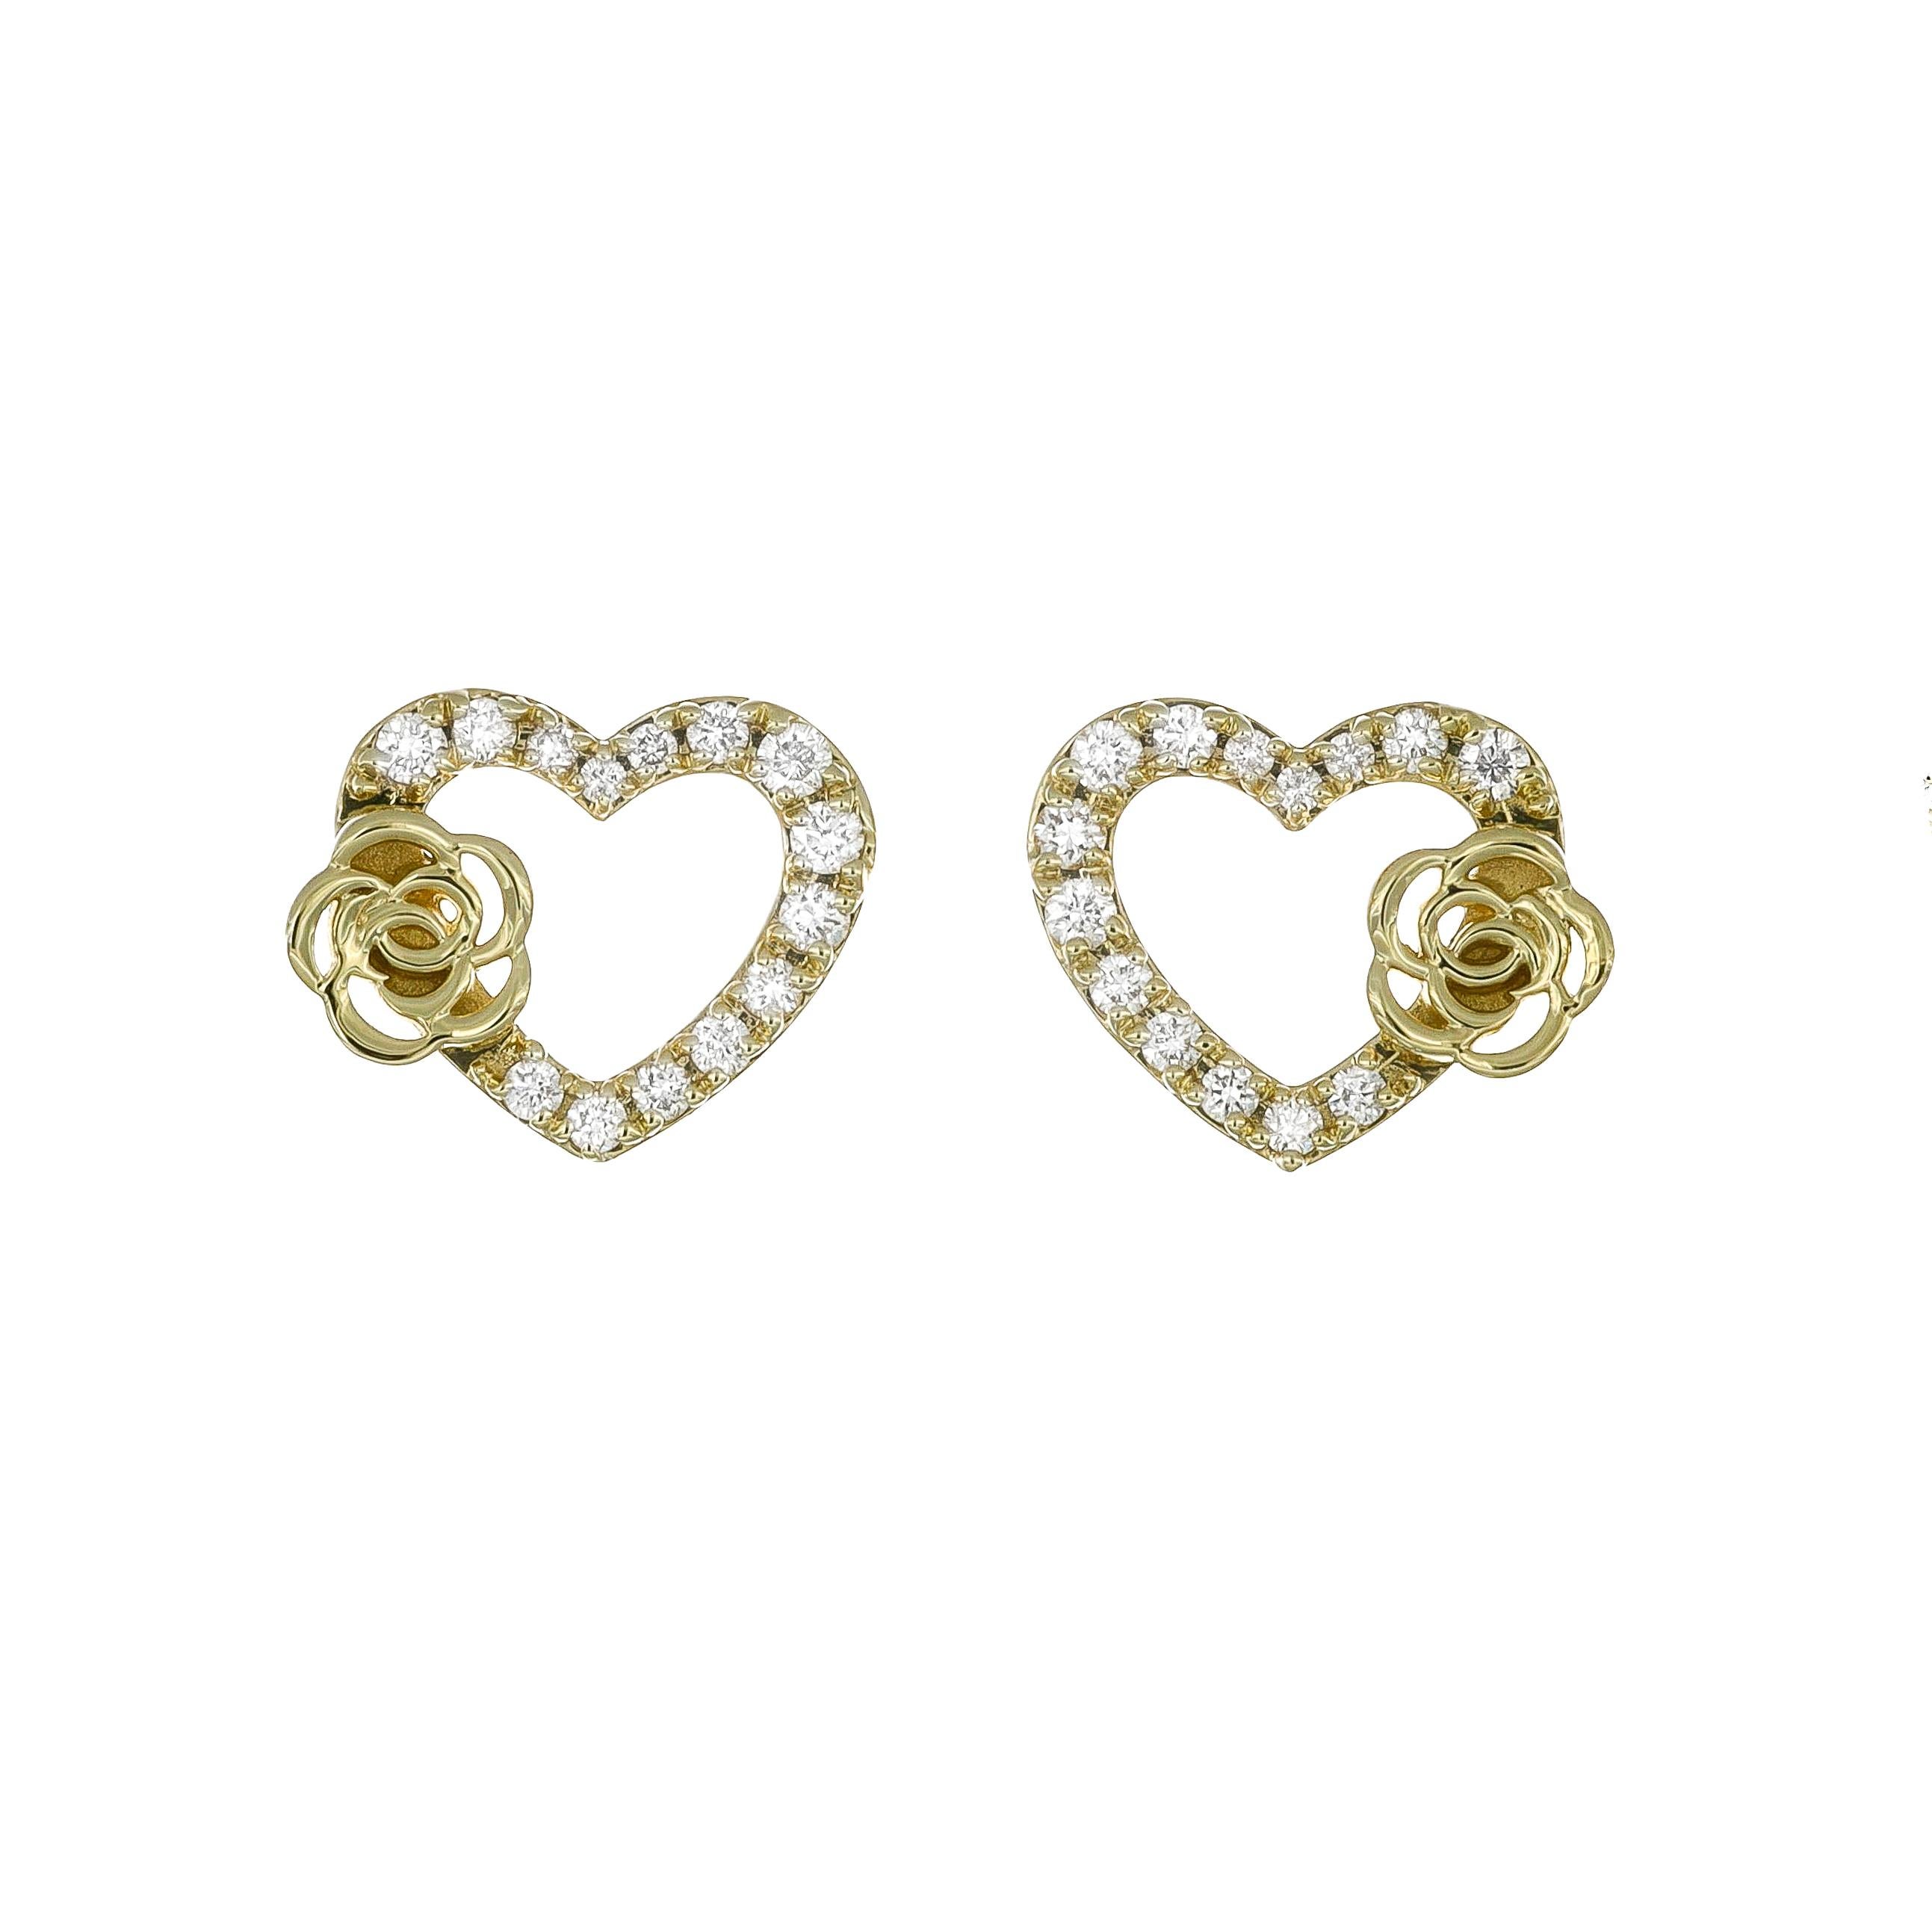 At the heart of each earring lies a captivating arrangement of diamonds  a total of 0.25 carats, meticulously set to form the outline of a contemporary heart shape, adding a touch of femininity, is the rose flower motif delicately adorns each heart,